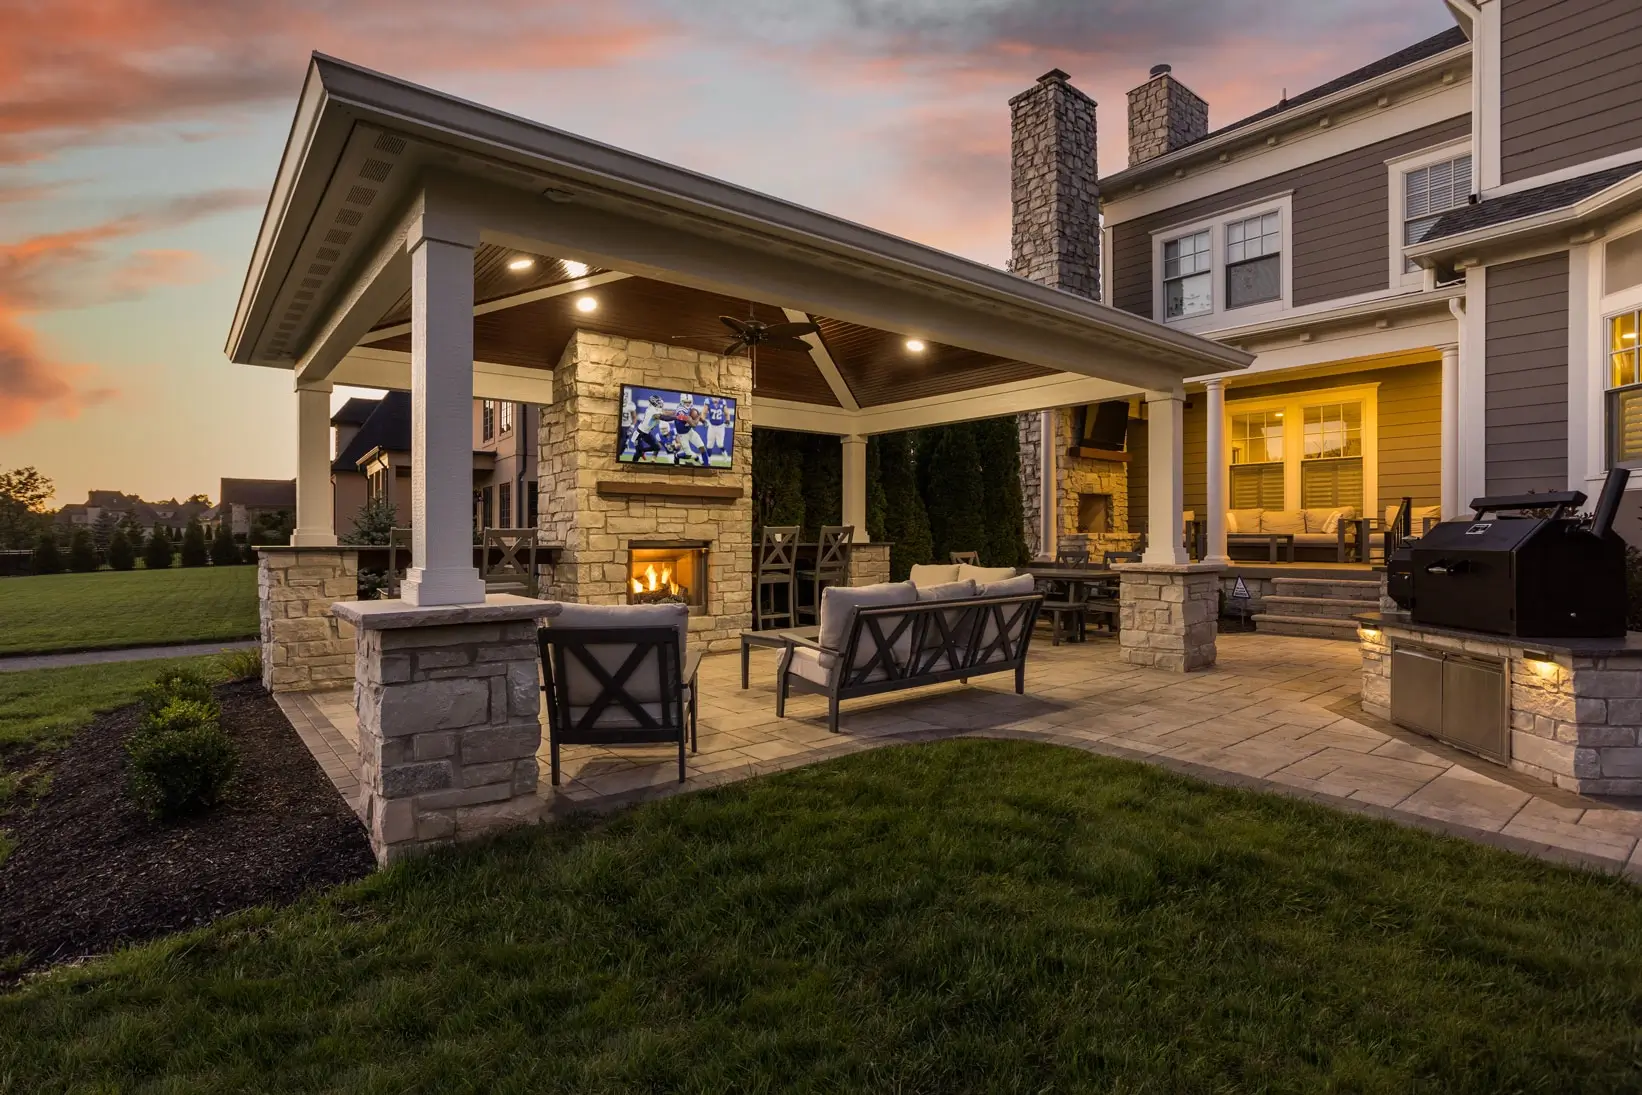 BPI outdoor living space with TV and cozy fireplace with sunset in background